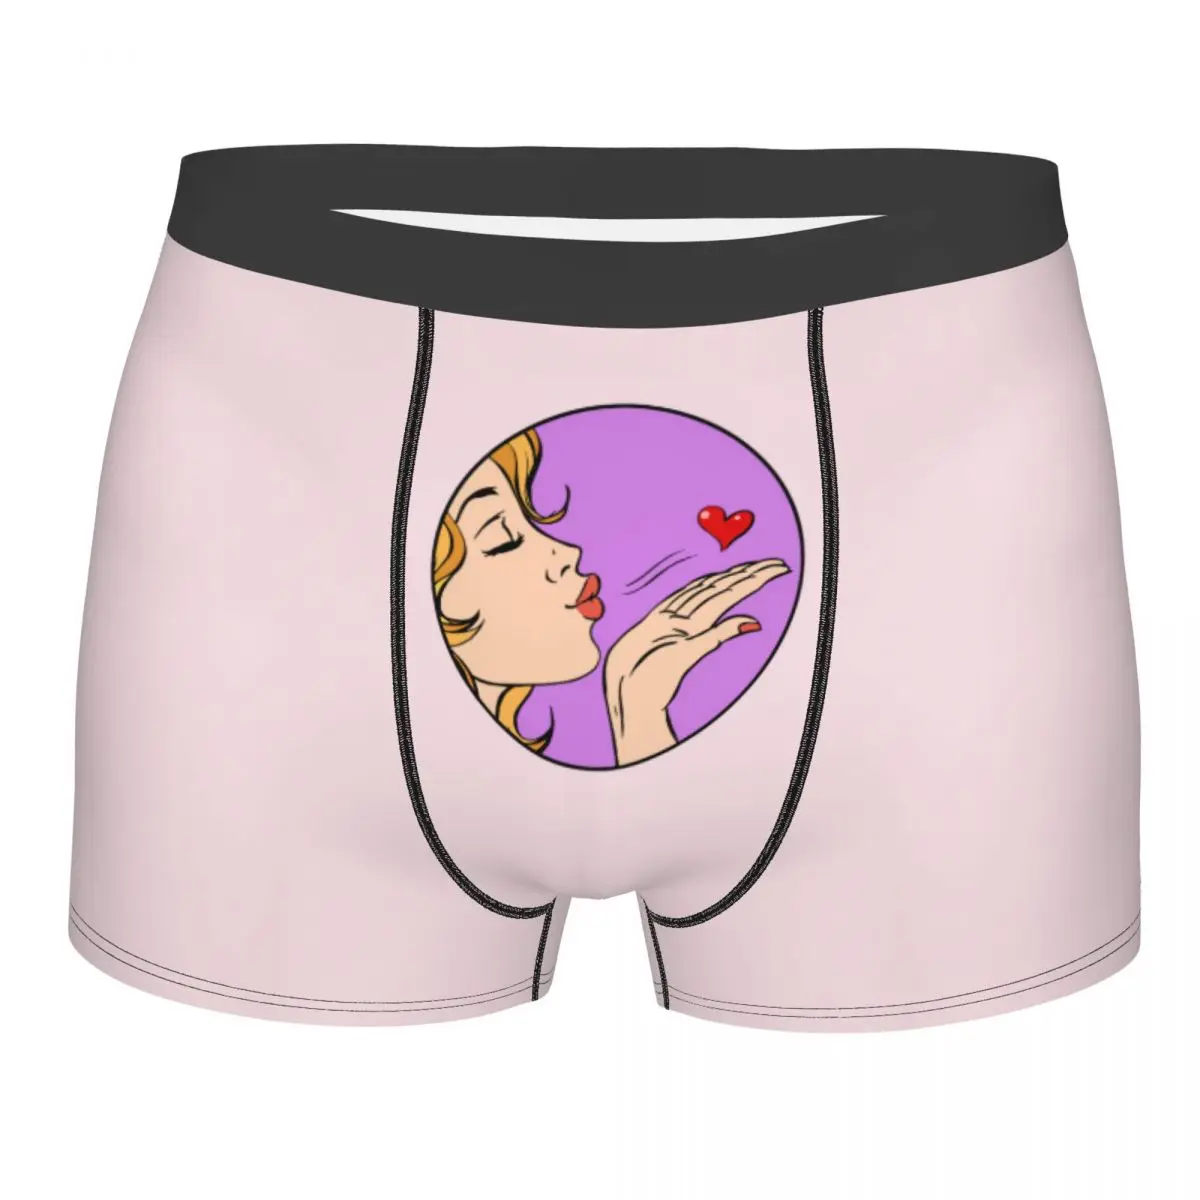 Mens Boxer Sexy Underwear Air Kiss Girl Heart Love Underpants Male Panties Pouch Short Pants